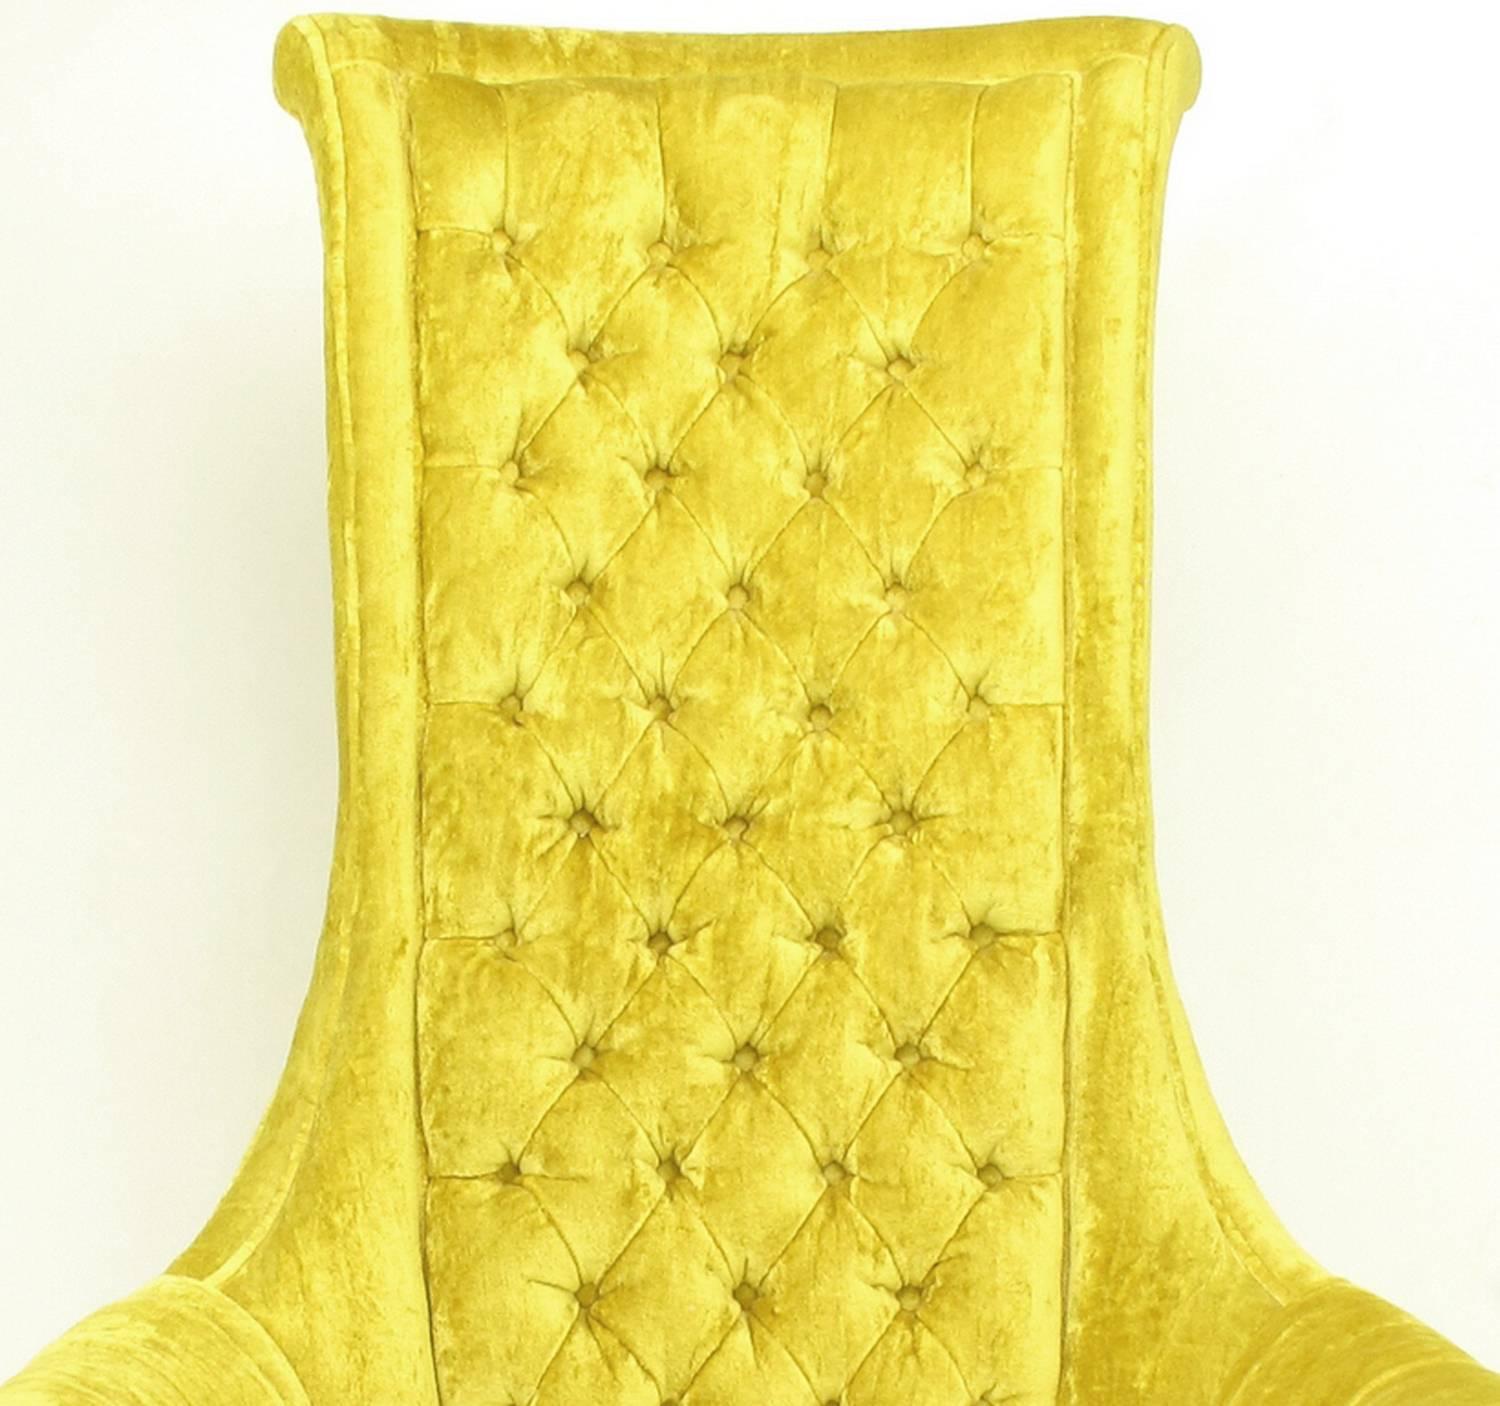 Mid-20th Century Tall Back Sinuous Lounge Chairs in Gold Crushed Velvet, circa 1960s For Sale